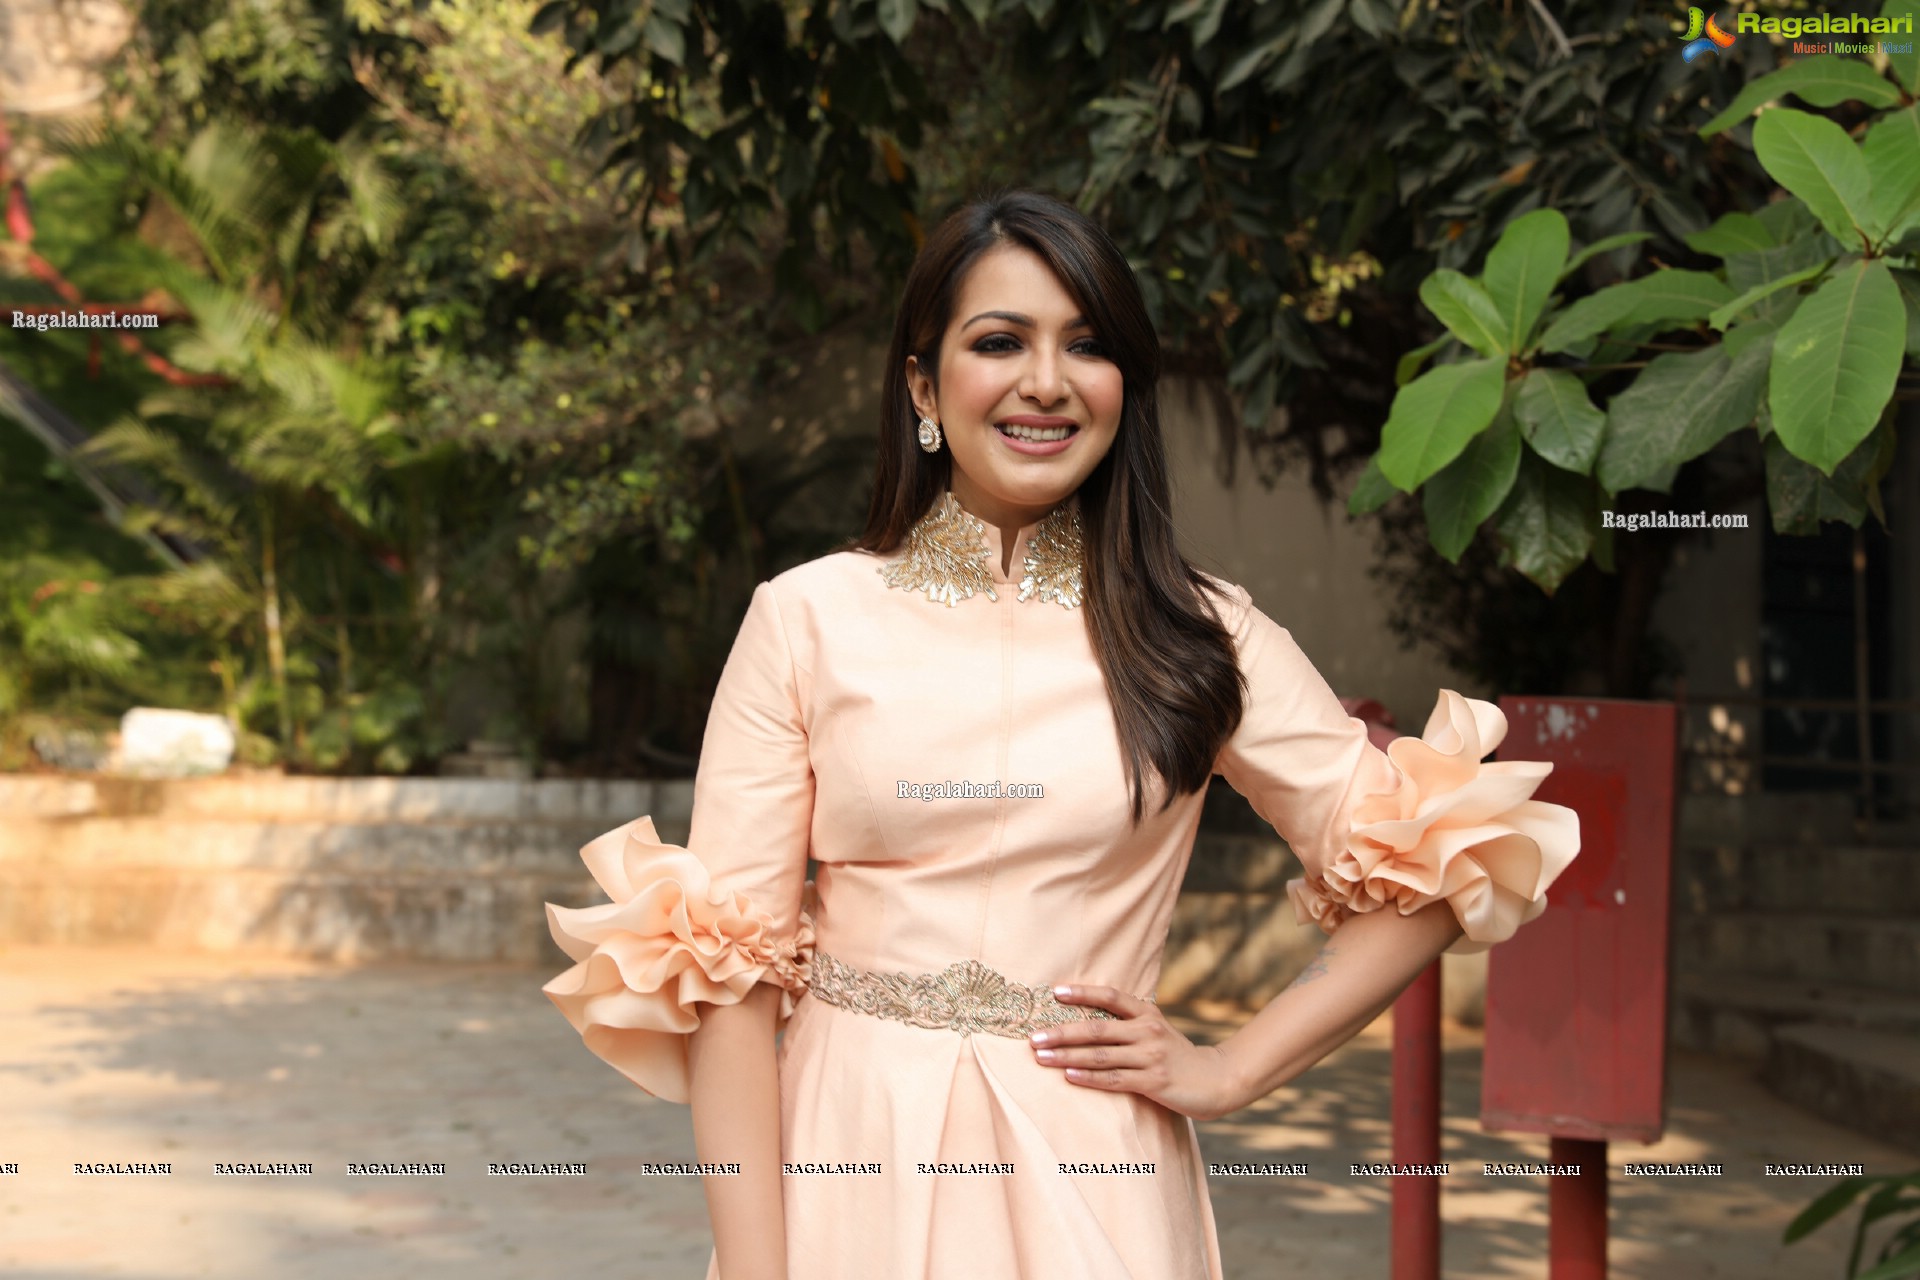 Catherine Tresa at Cancer Awareness Super Car Rally, HD Photo Gallery